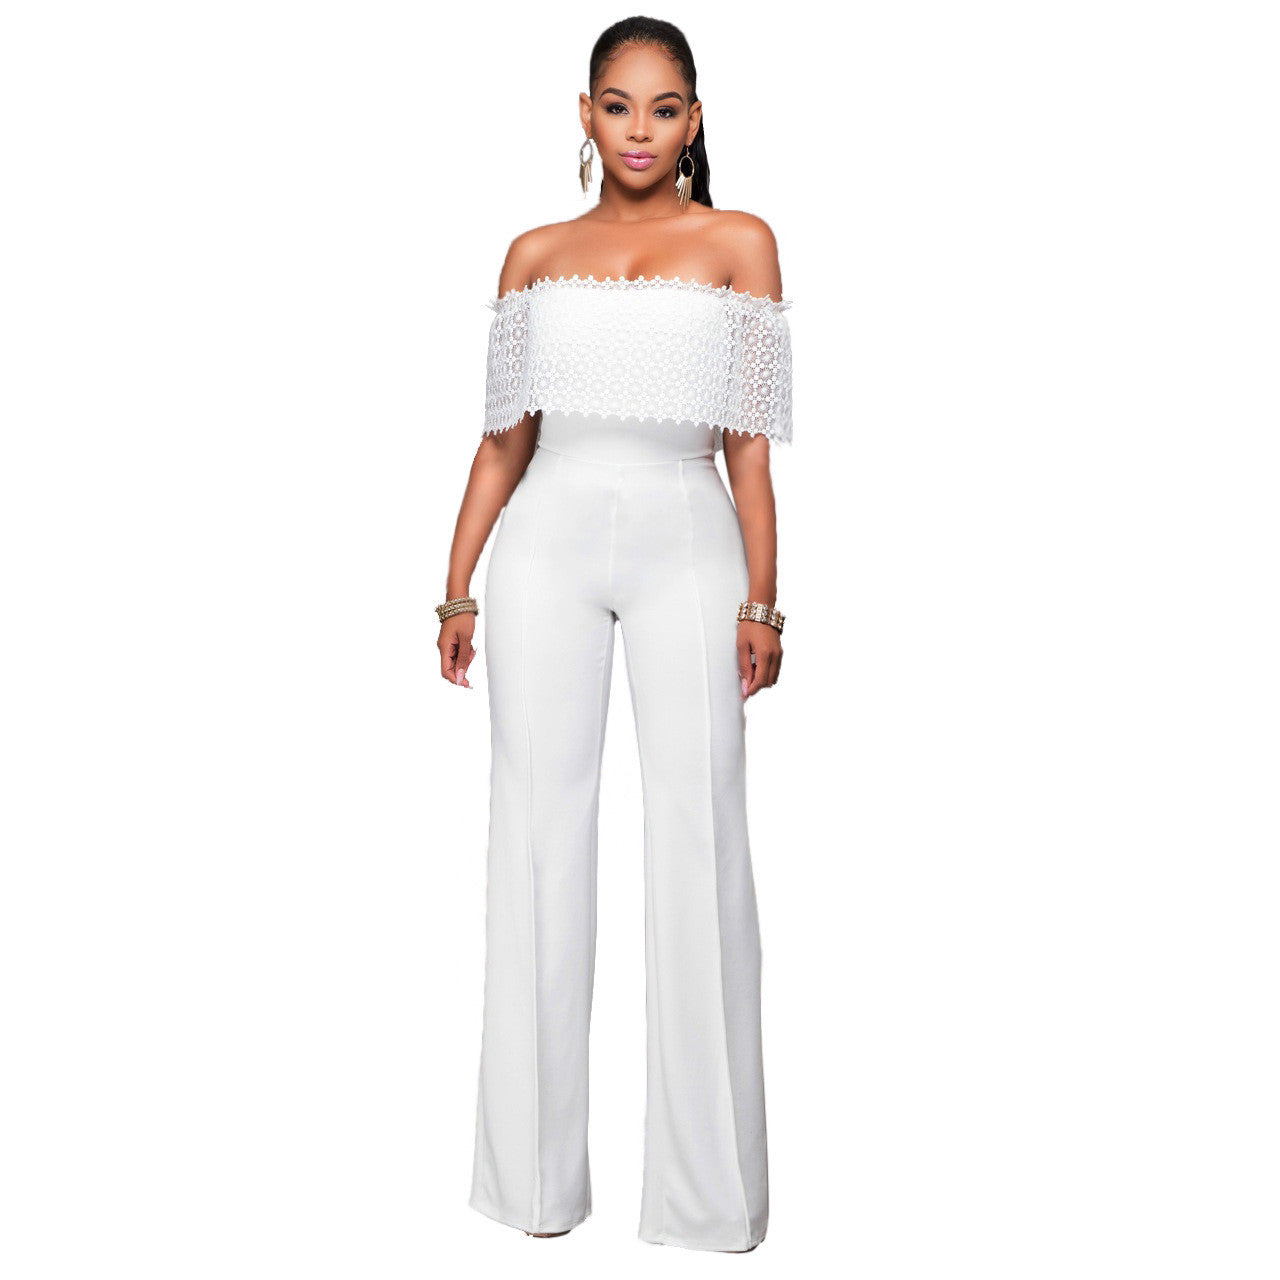 Pure Color Strapless Short Sleeves Long Jumpsuit